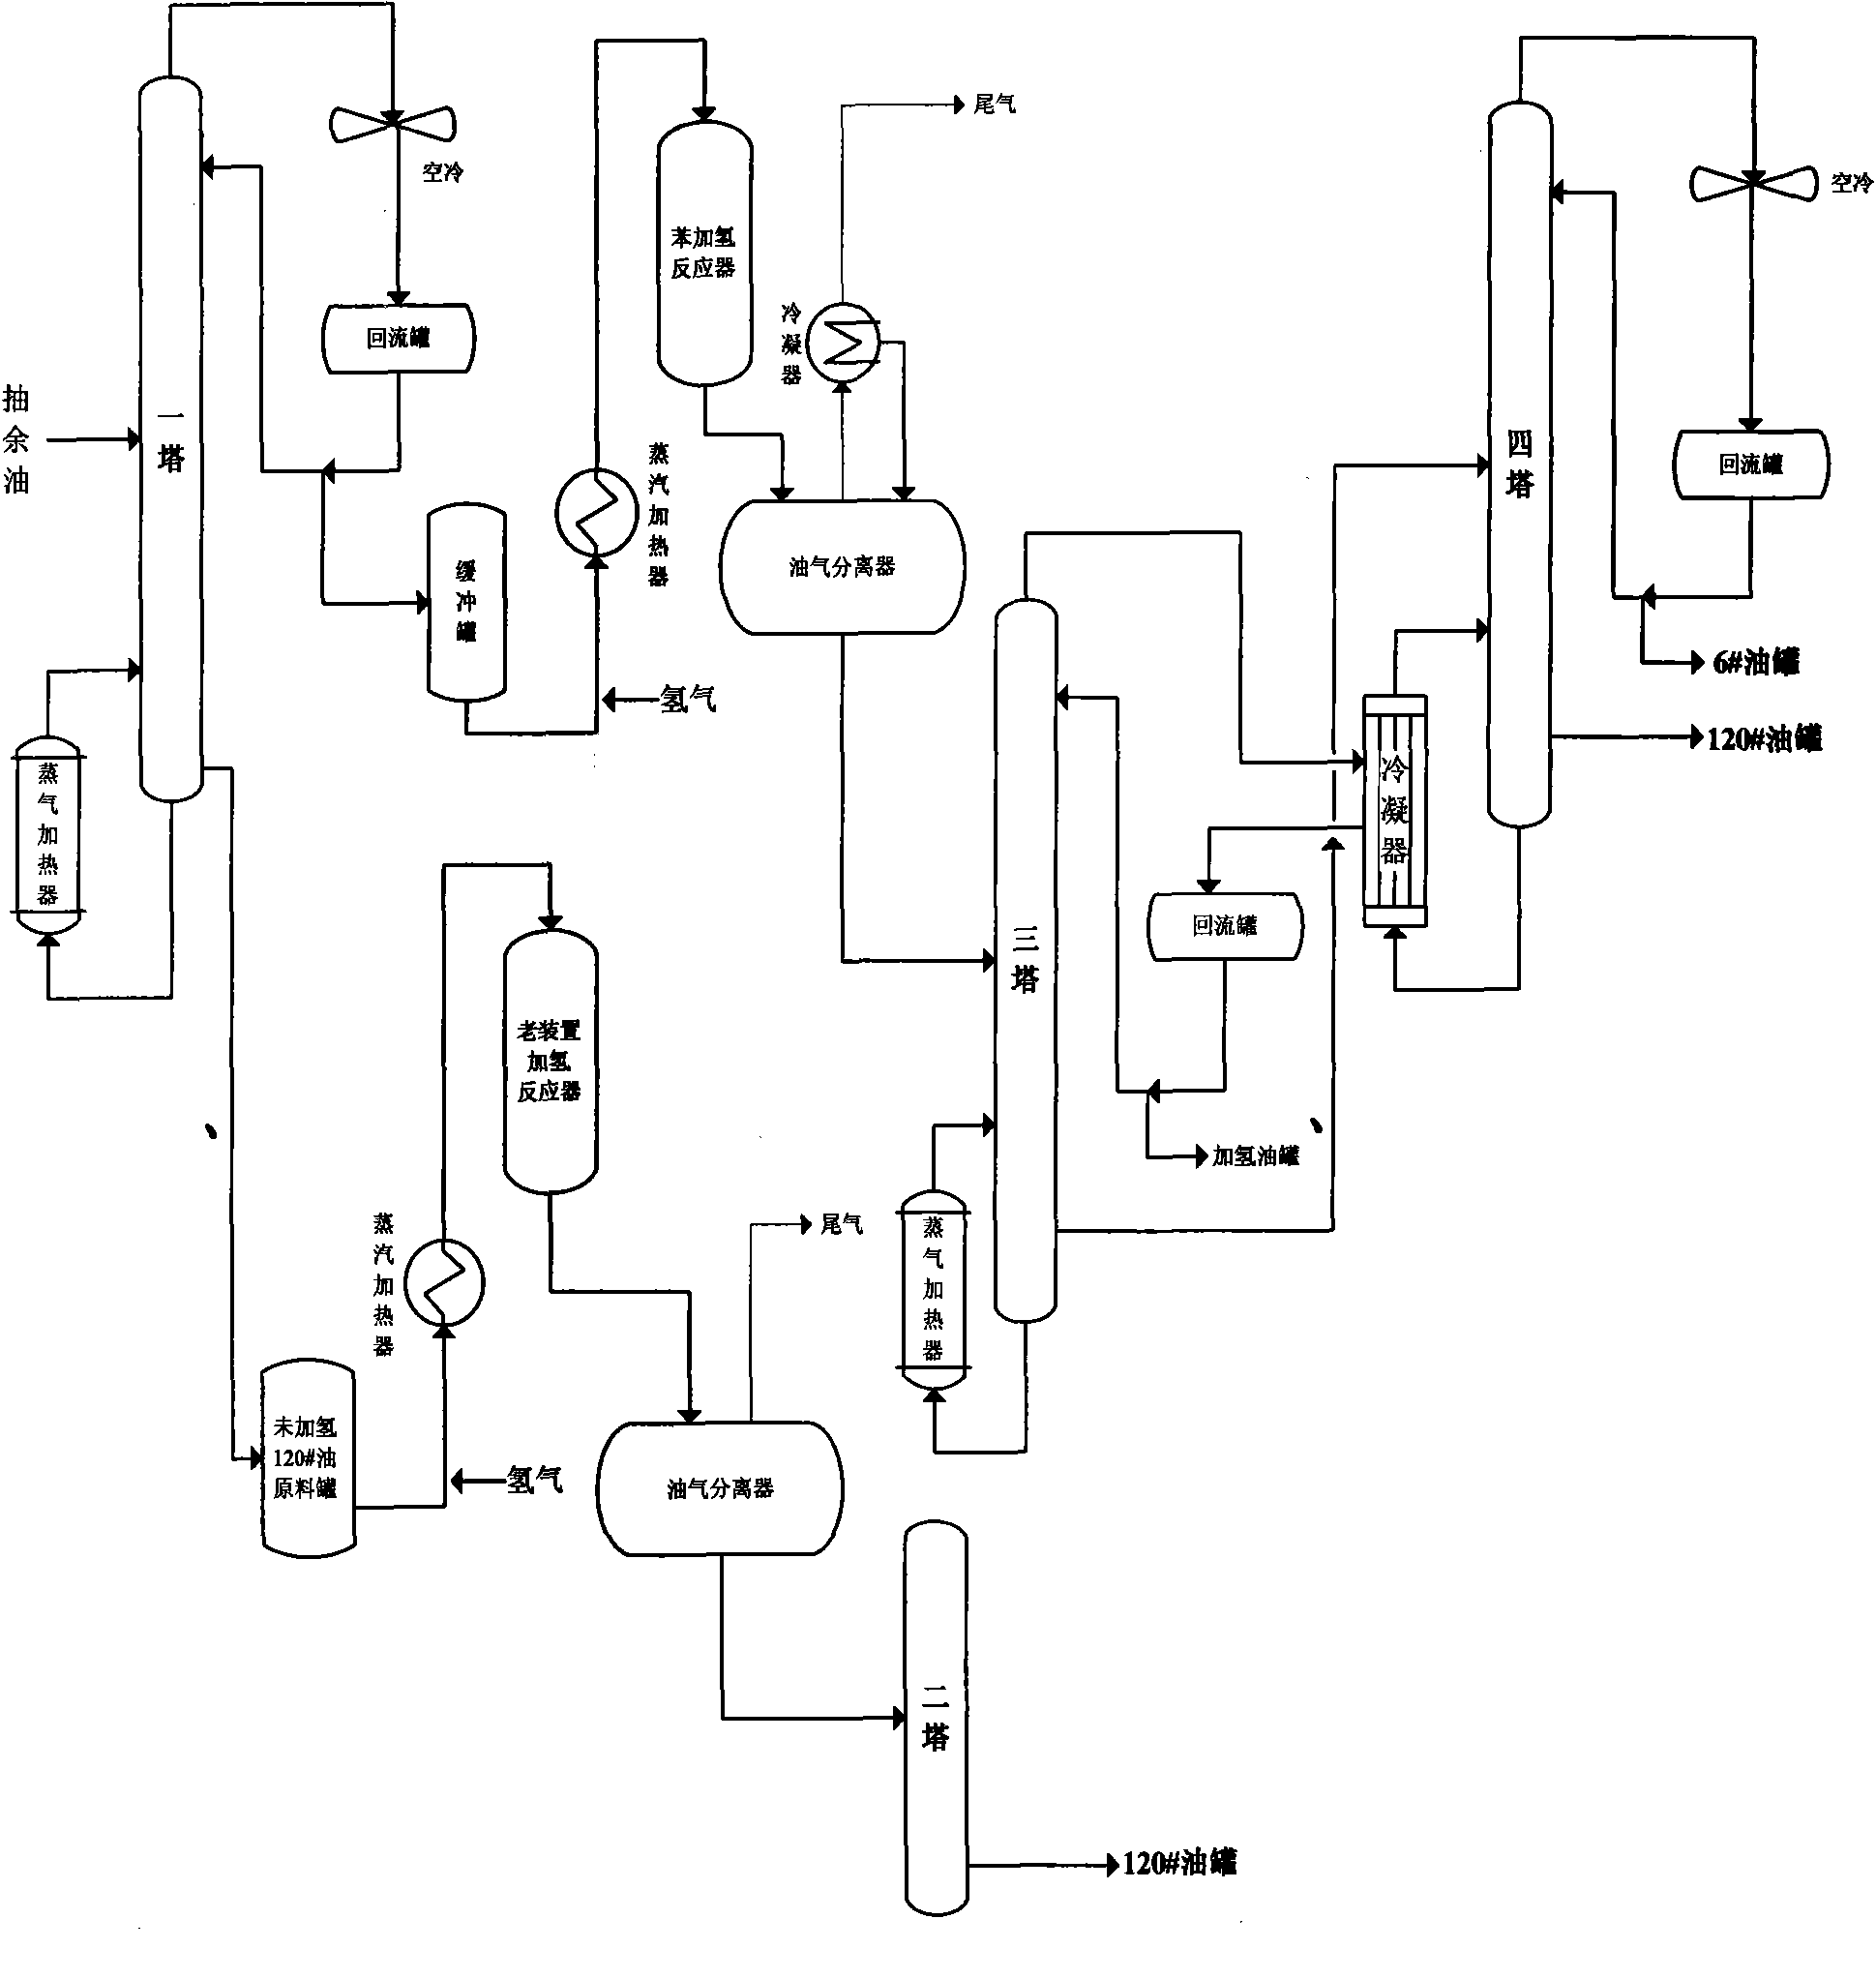 Process for producing solvent oil by removing aromatic hydrocarbon from raffinate oil